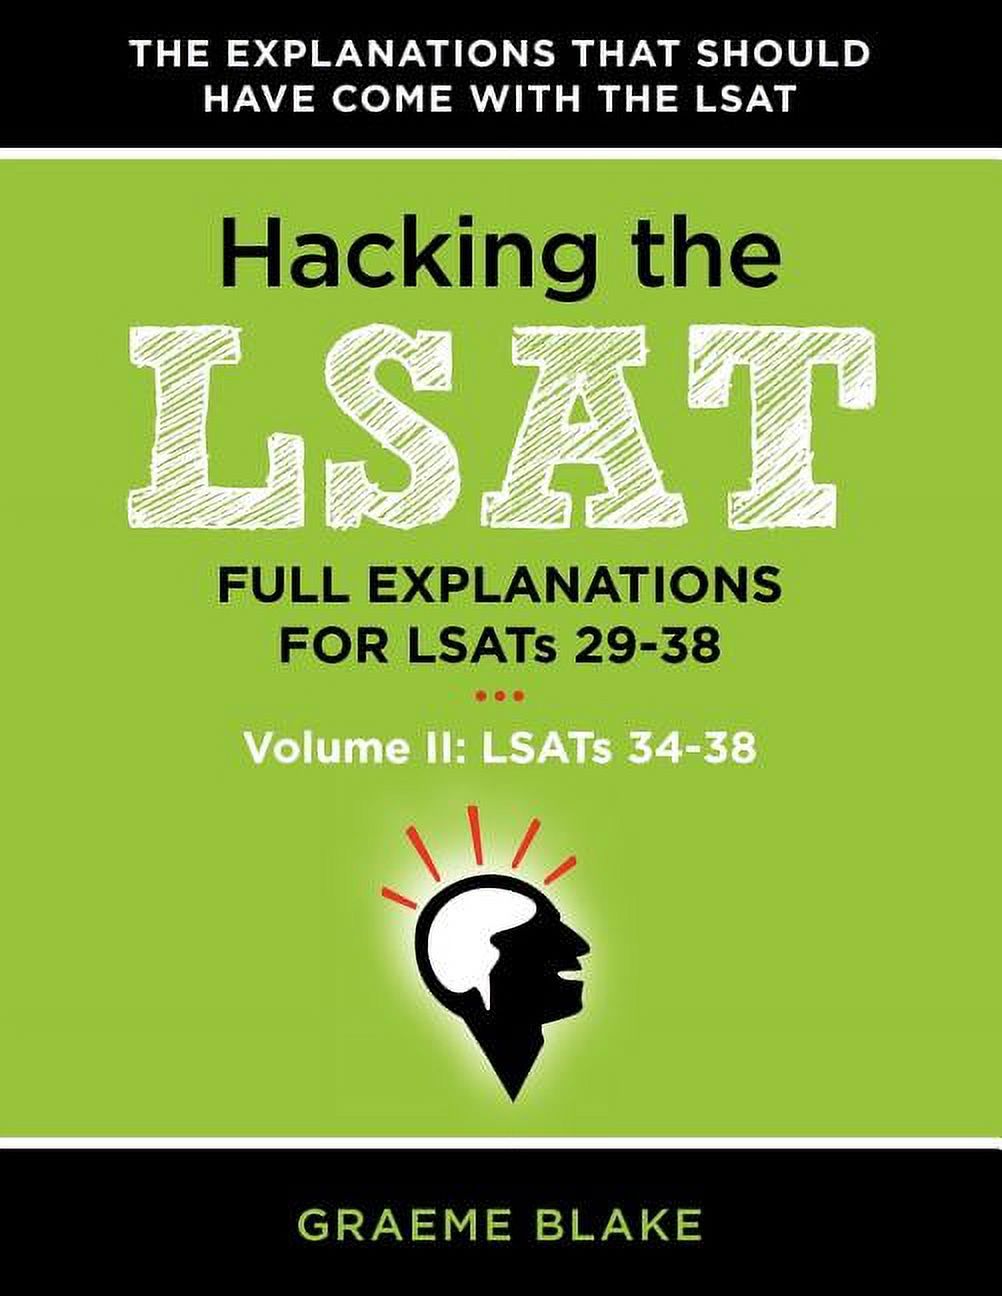 Hacking the LSAT: Full Explanations for Lsats 29-38 (Volume II: Lsats 34-38) (Paperback) - image 1 of 1